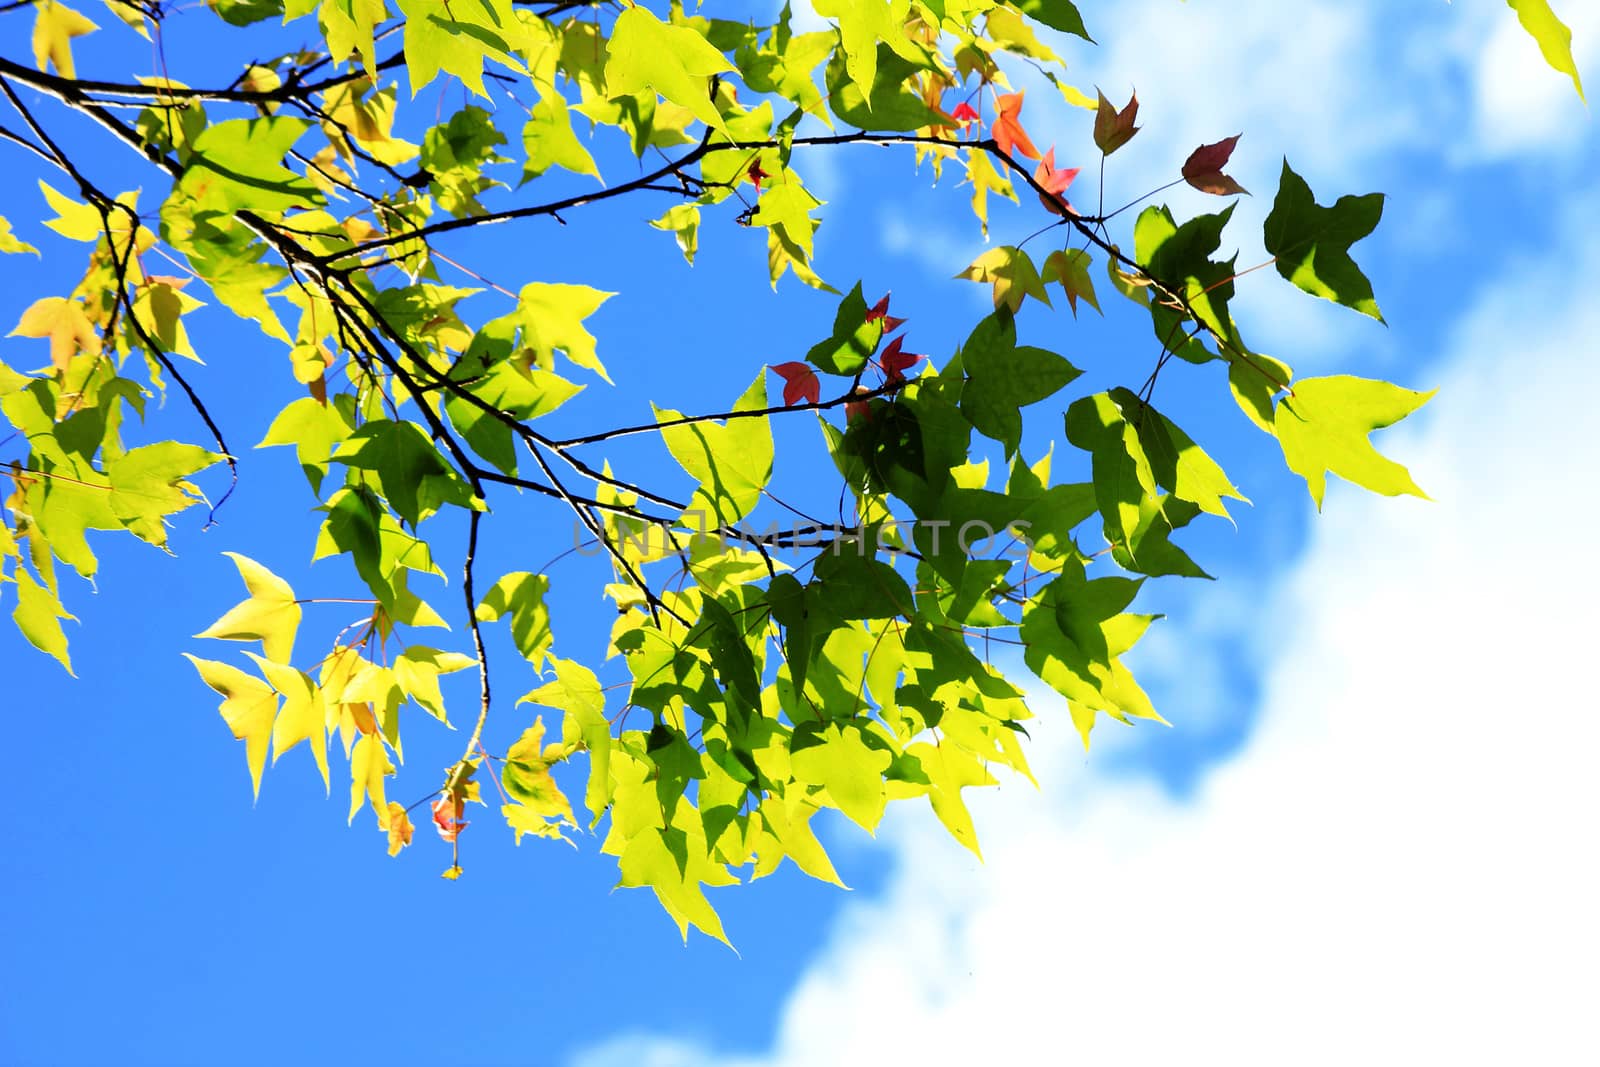 Maple leaves and sky at daytime